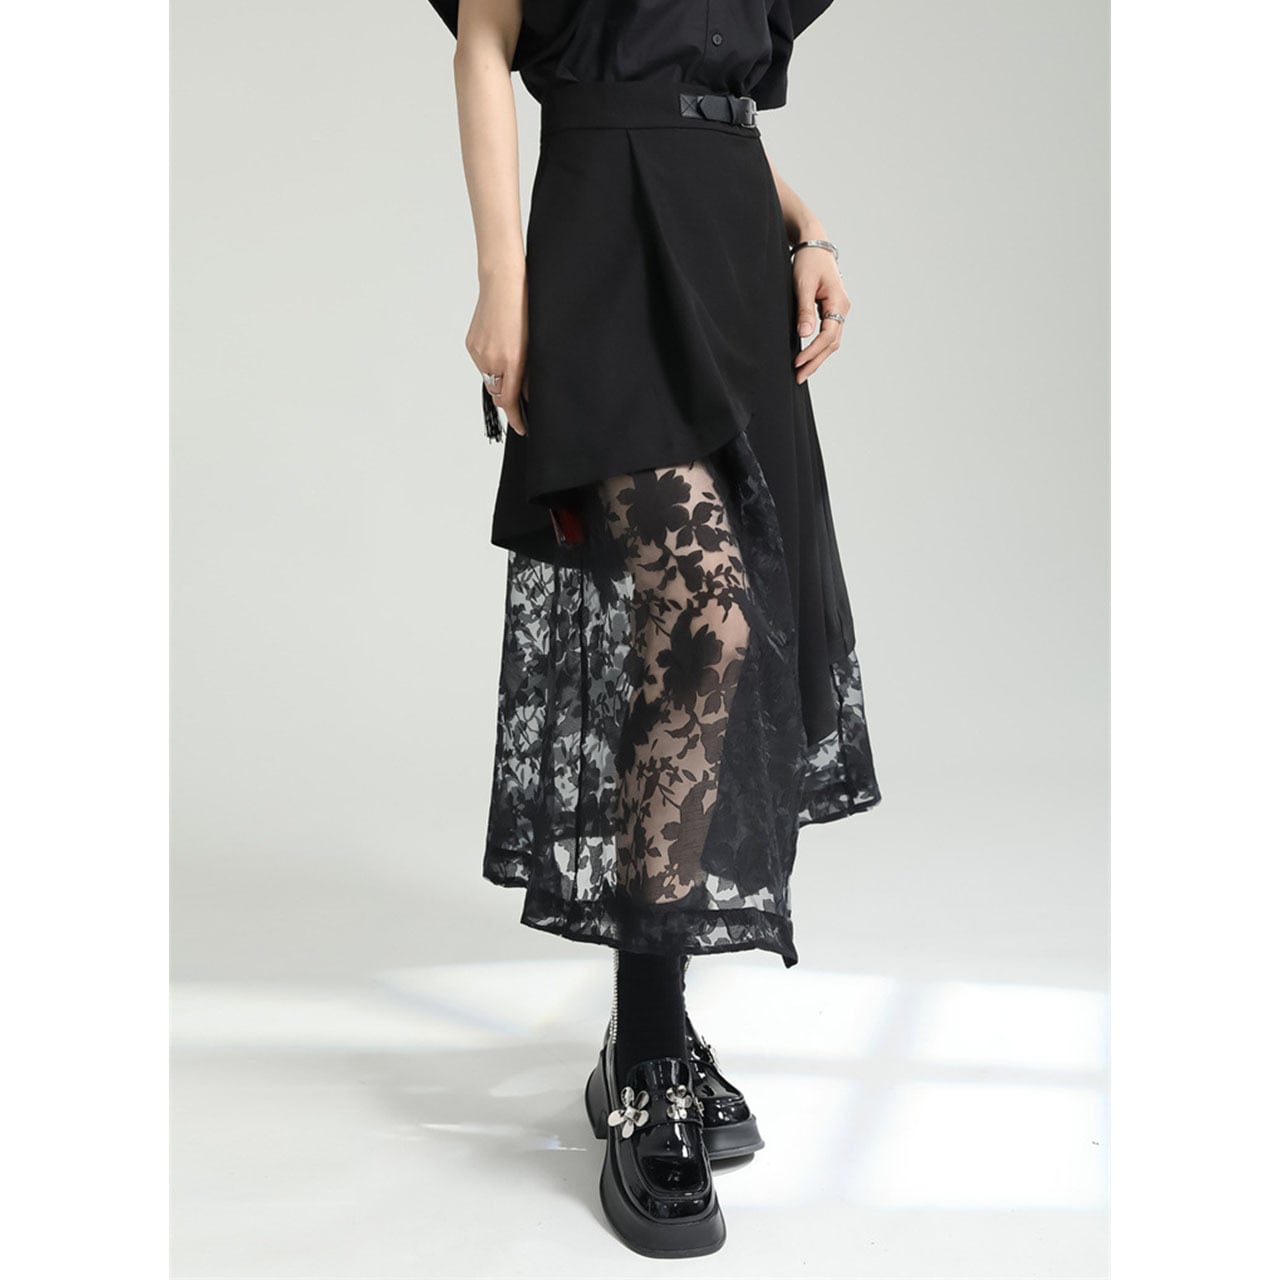 side flare layered skirt